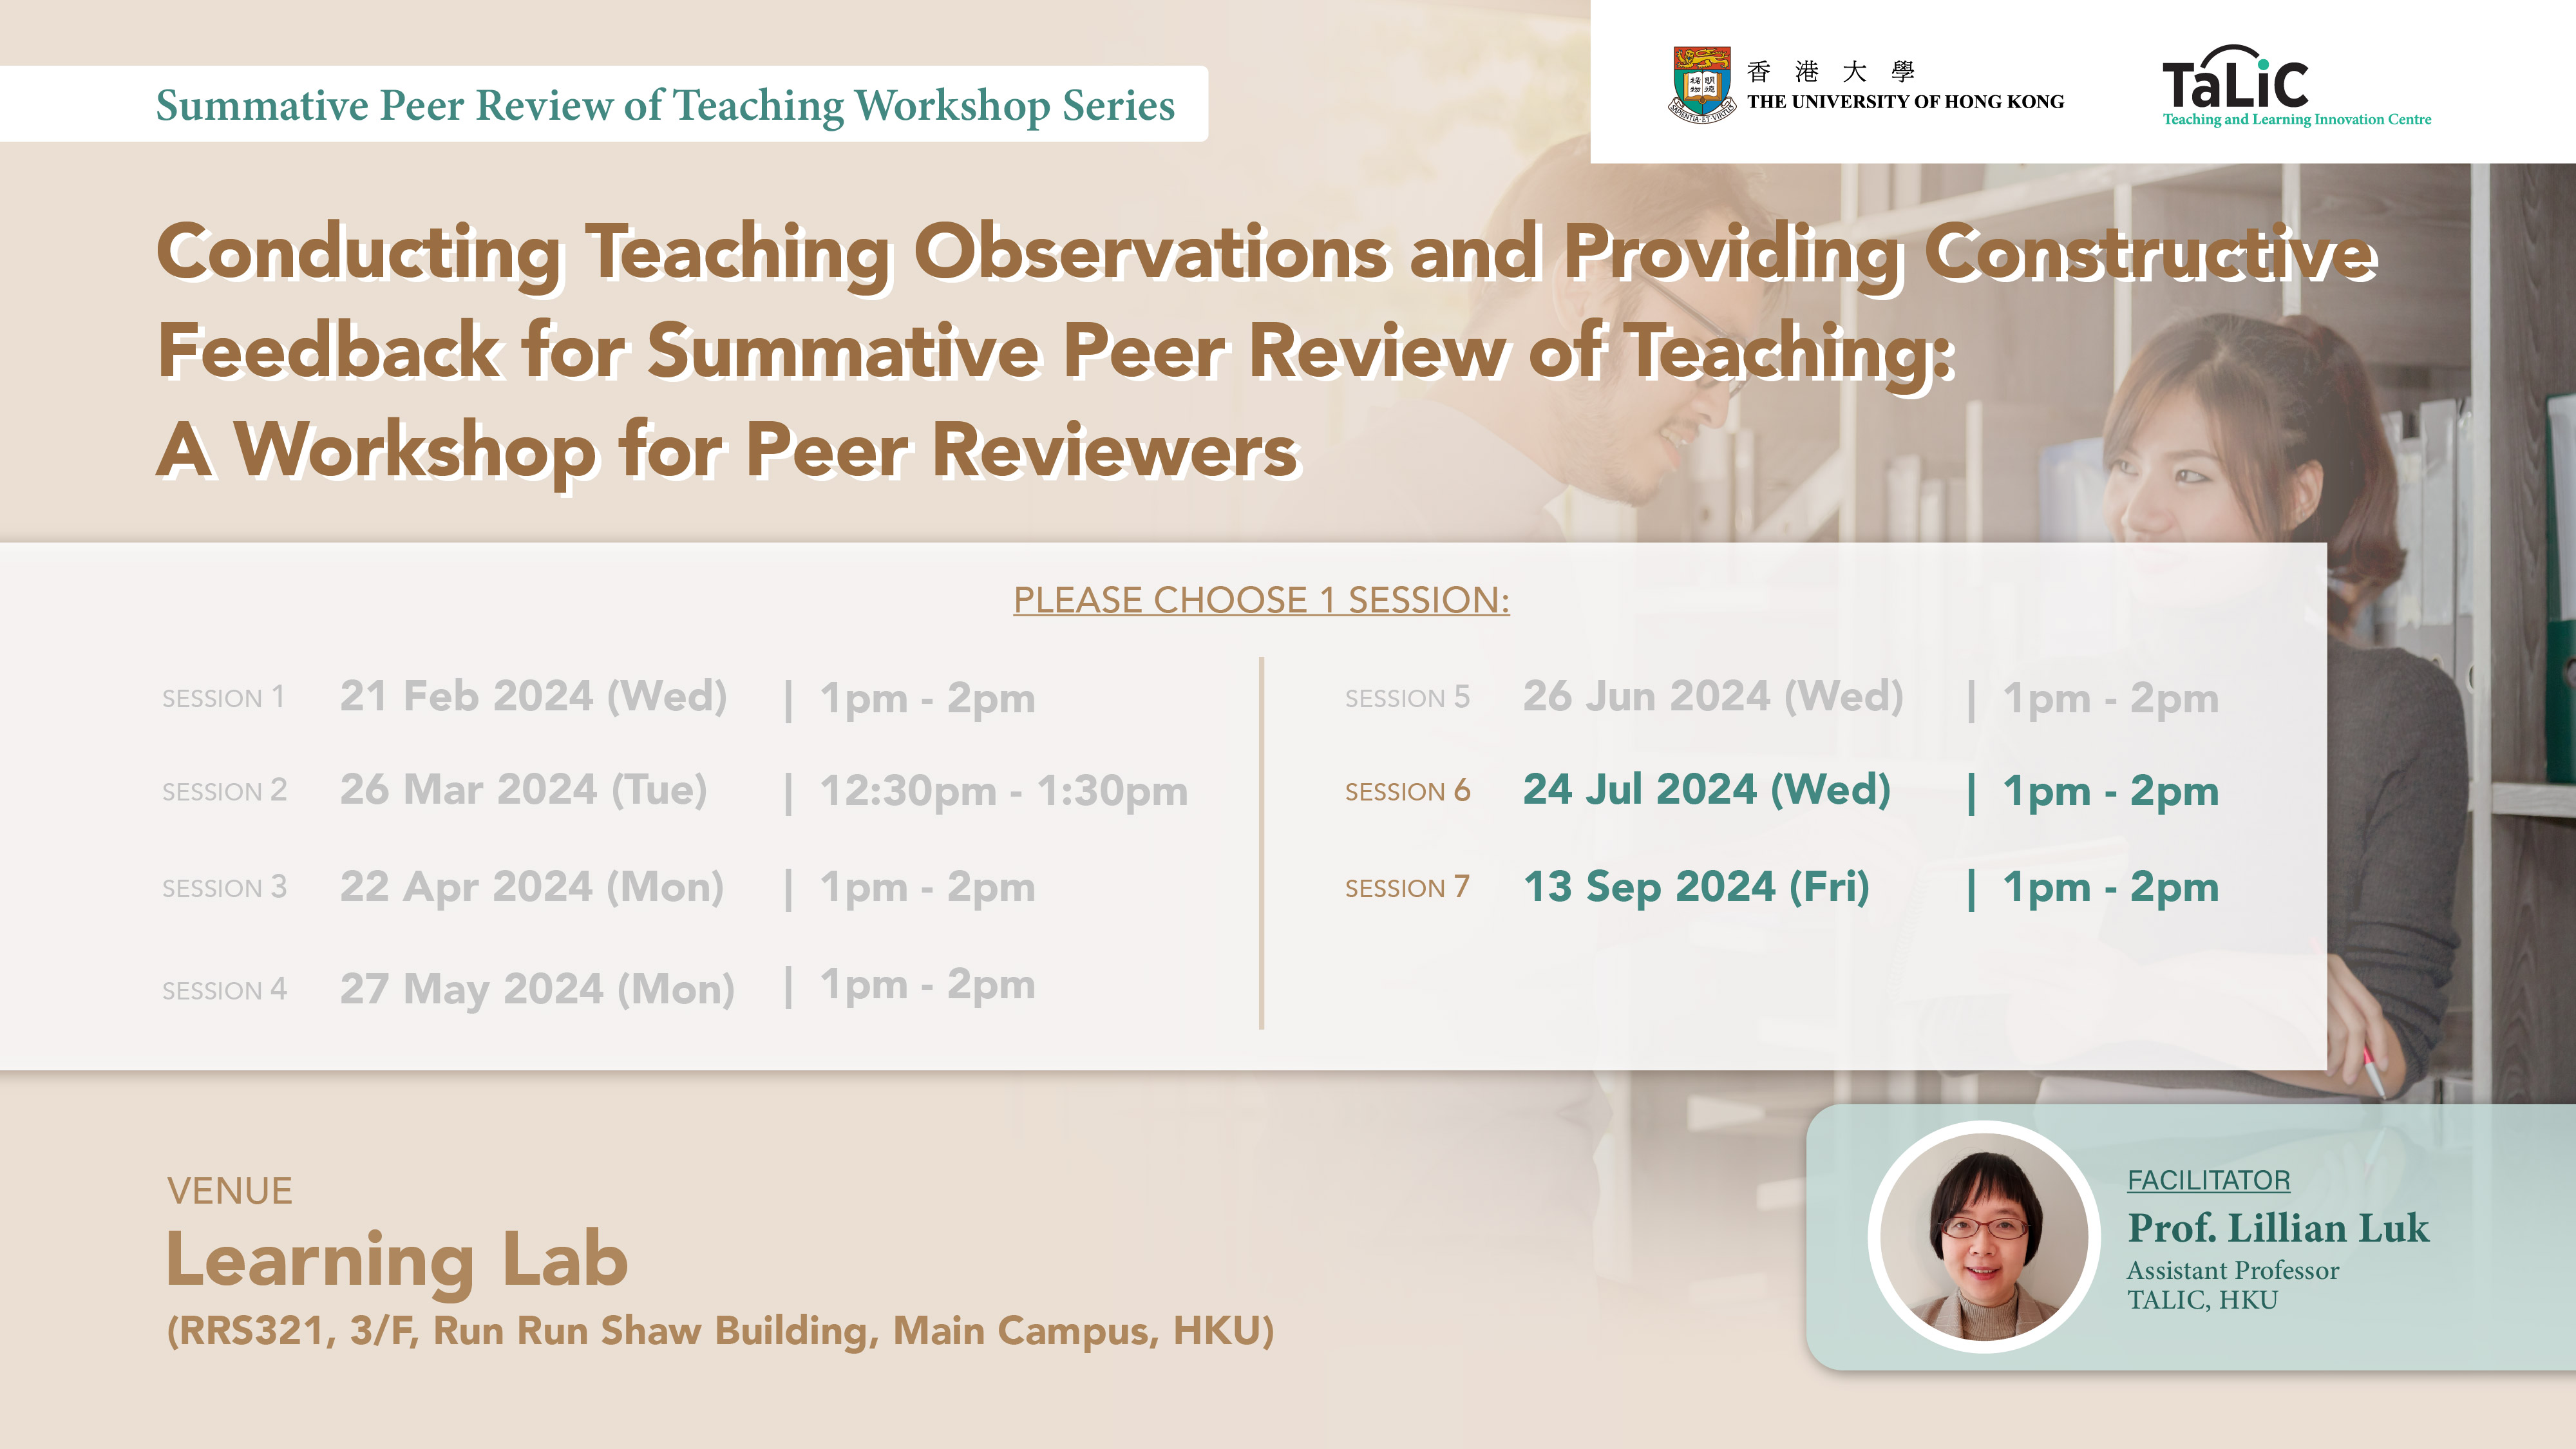 Conducting Teaching Observations and Providing Constructive Feedback for Summative Peer Review of Teaching: A Workshop for Peer Reviewers